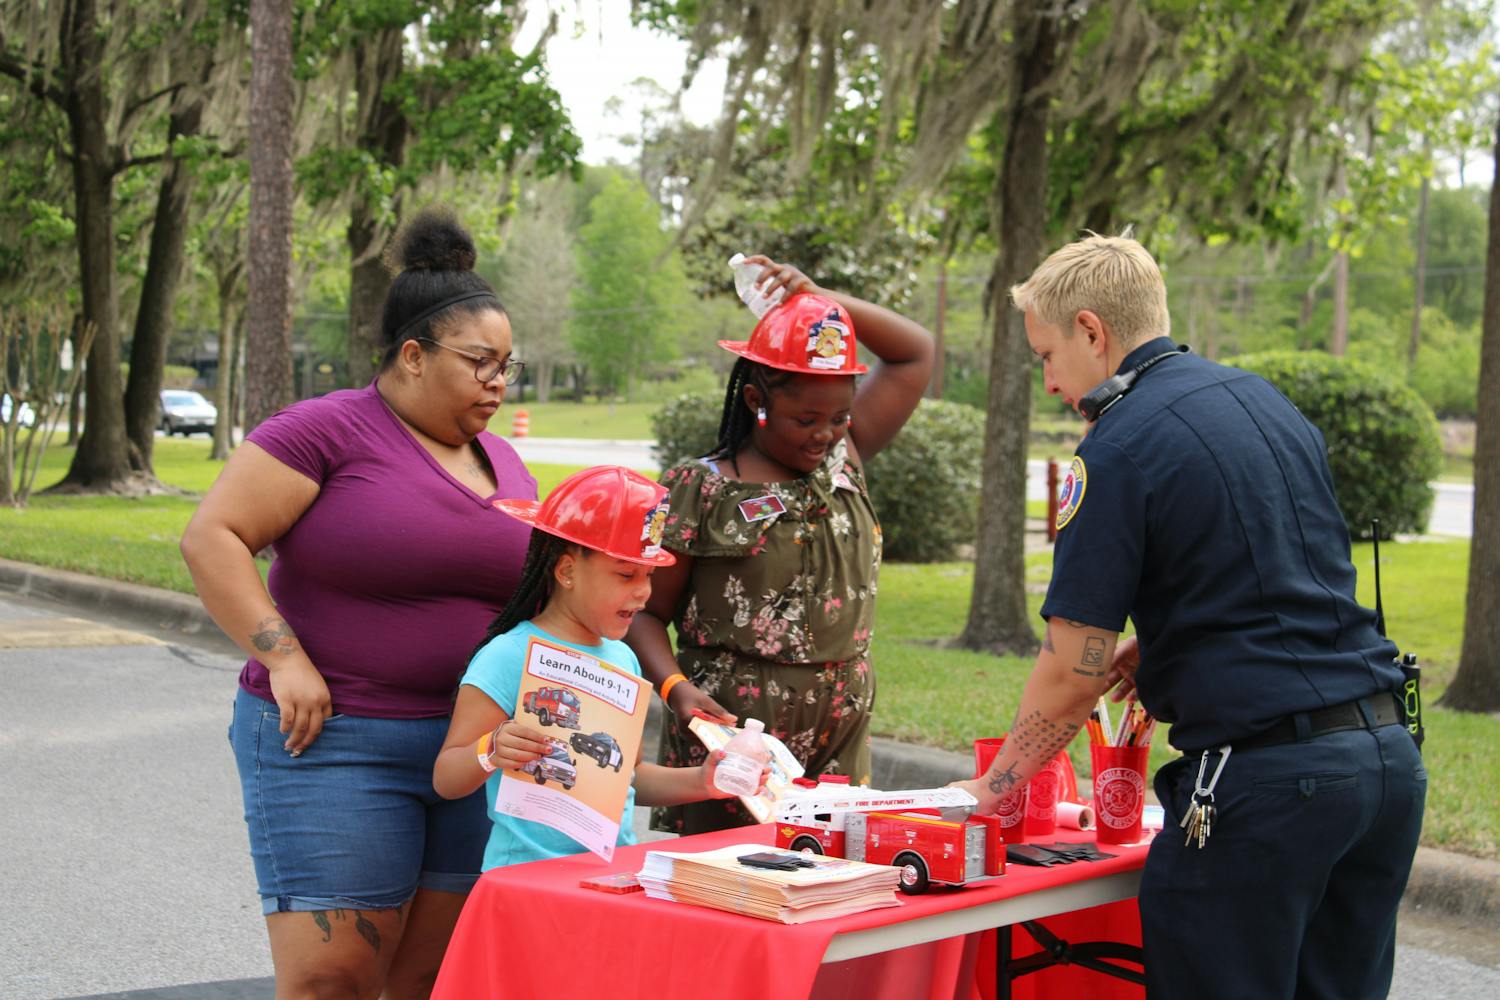 Autumn Anderson, 6, and Taylar Cook, 9, talk to firefighter Zoe Siemienskil at the Bike Rodeo, Safety and Health Fair hosted by UF Health Shands Children’s Hospital on Saturday, March 25, 2023.